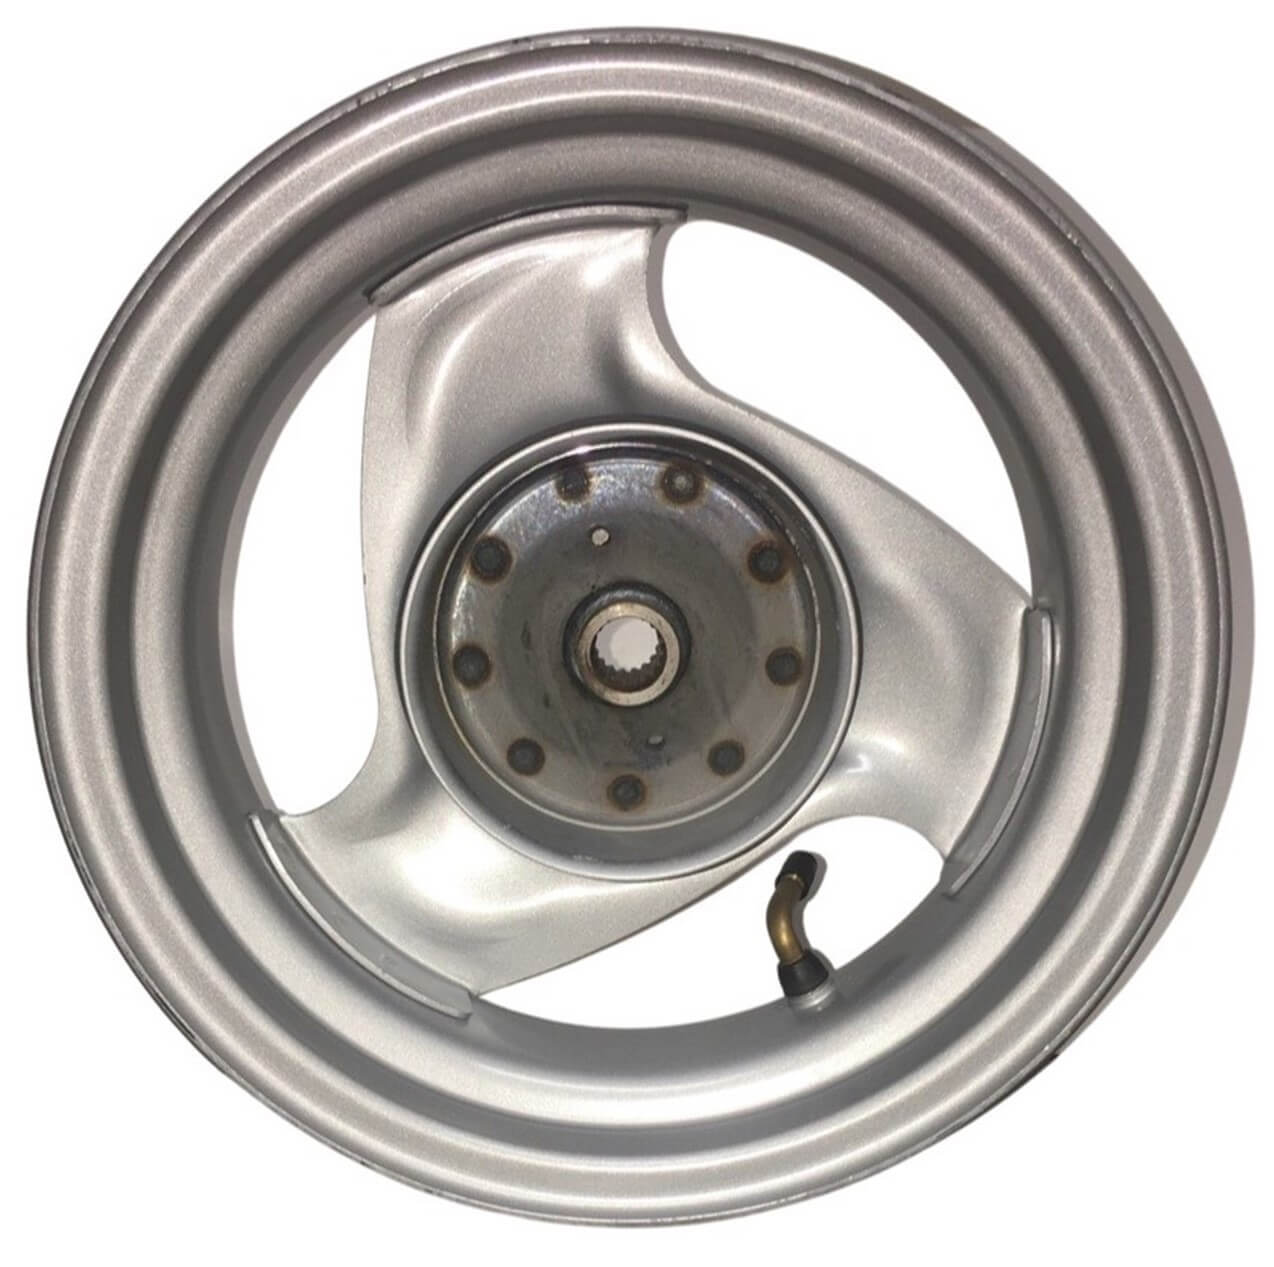 Rear Wheel Rim (Drum Brake) Fits E-Ton Beamer 50-150 Scooters + Others. Rim Size 3.50x10 Shaft ID=20 Splines=18 Drum ID=110mm - Click Image to Close